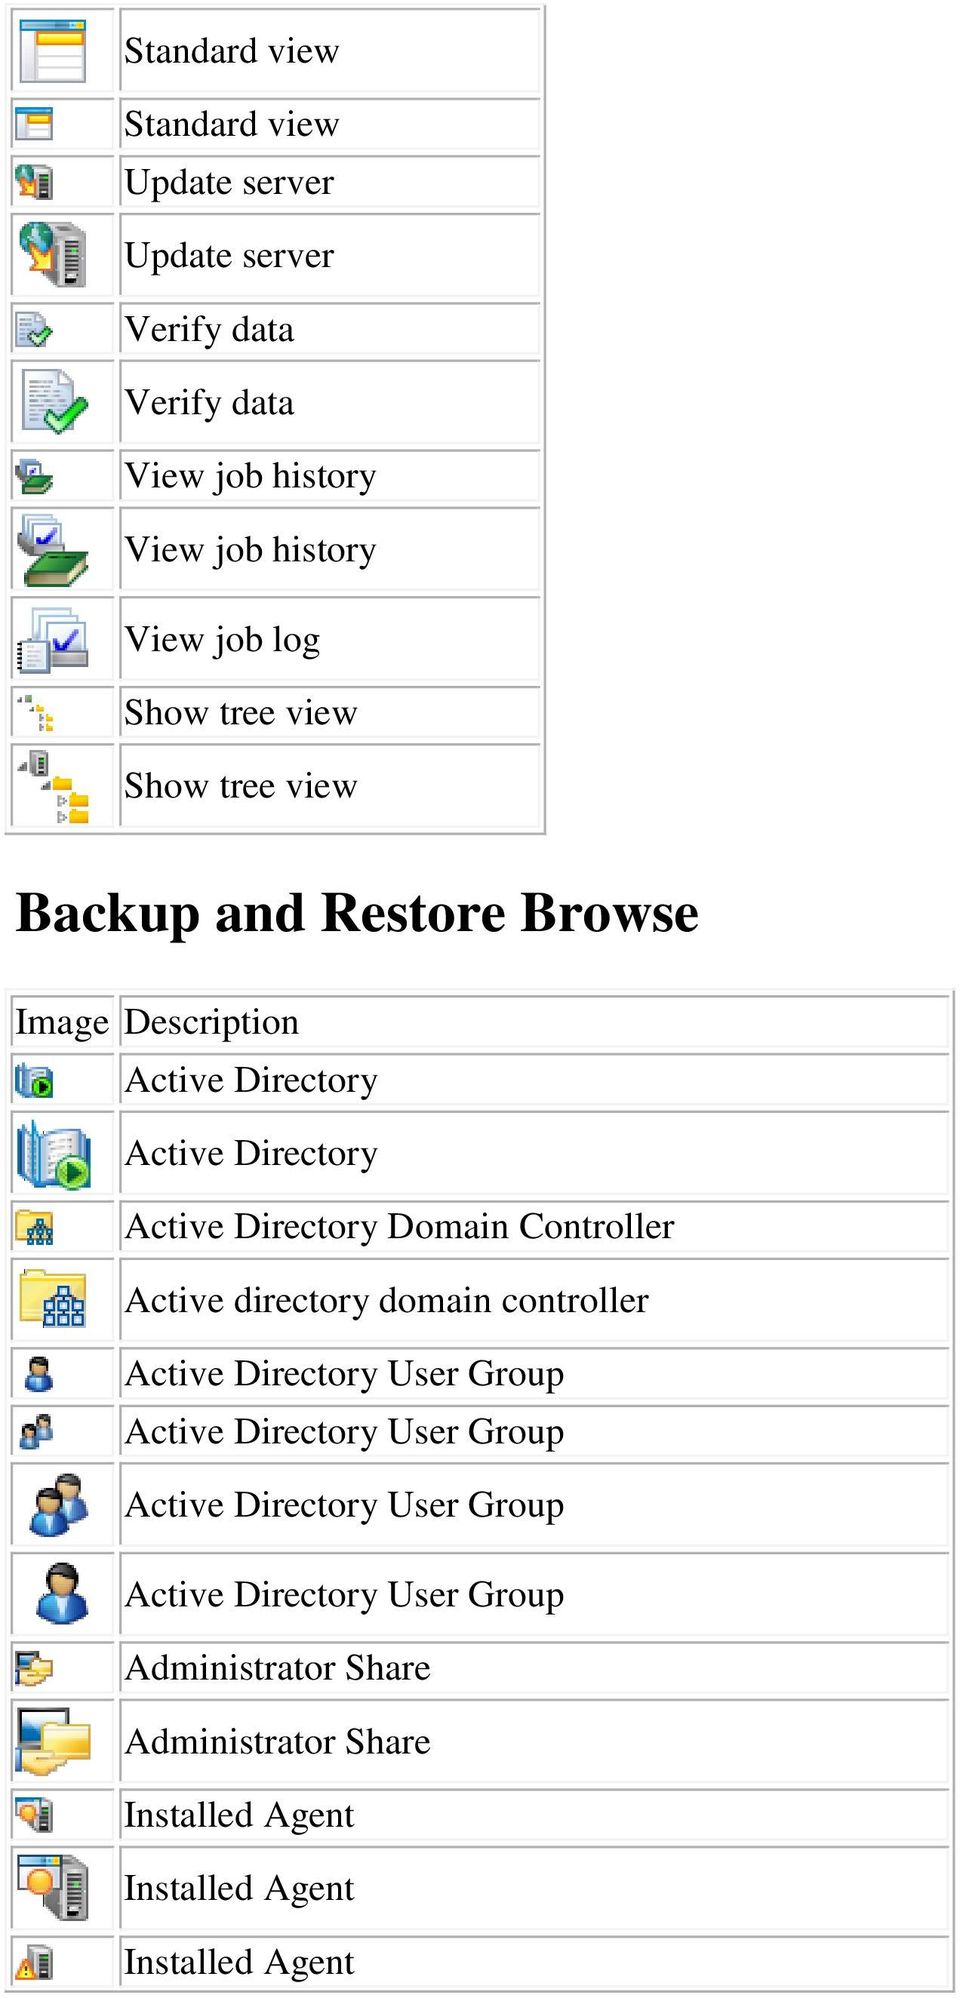 Directory Domain Controller Active directory domain controller Active Directory User Group Active Directory User Group Active